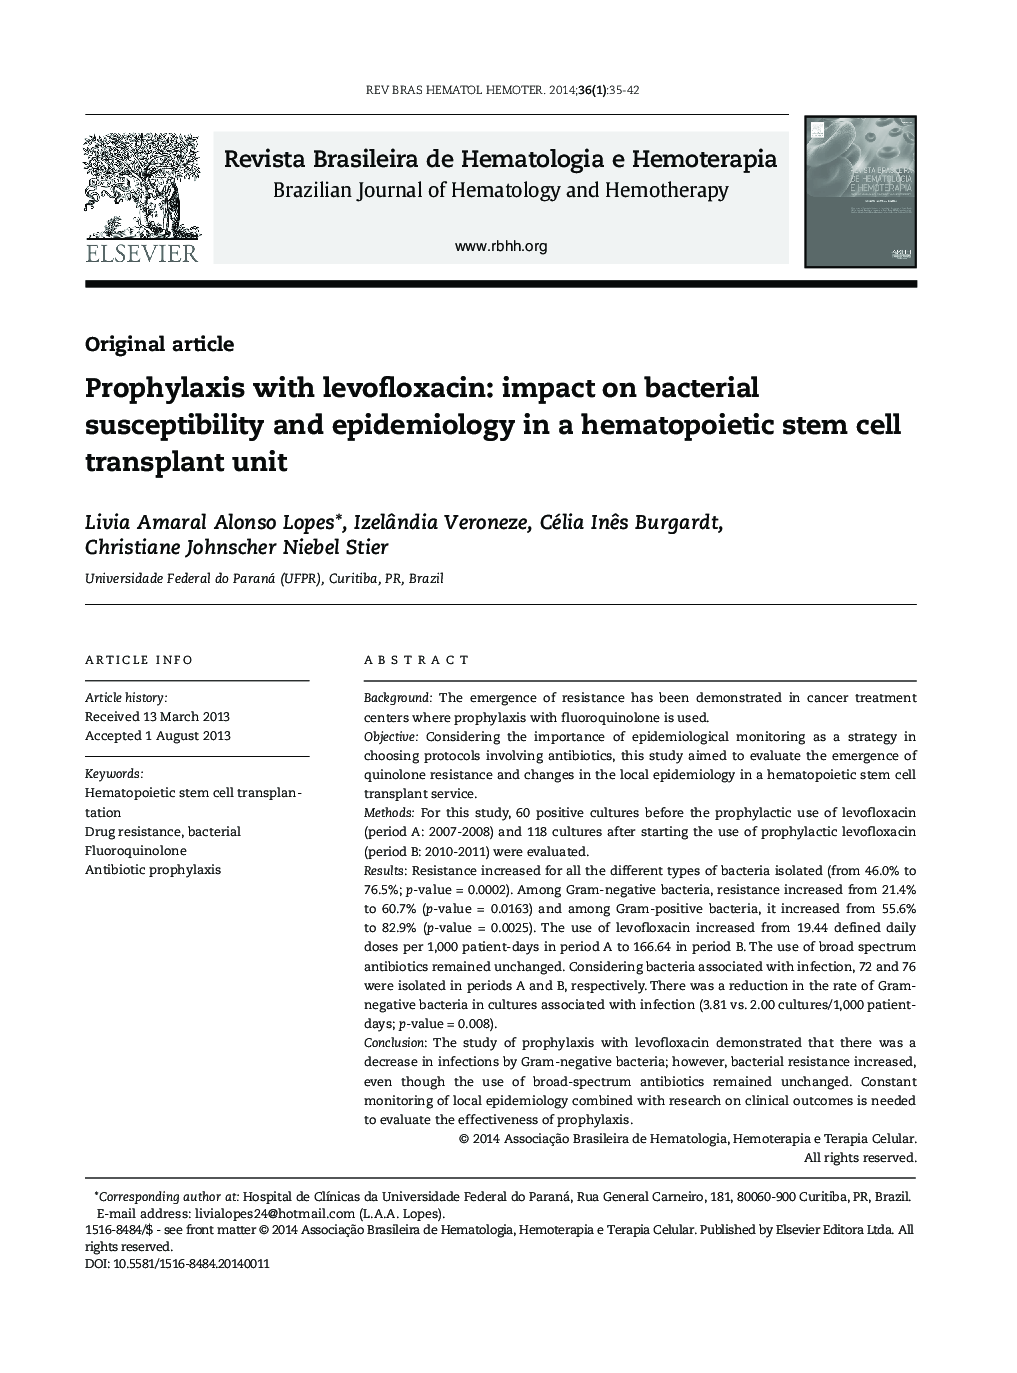 Prophylaxis with levofloxacin: impact on bacterial susceptibility and epidemiology in a hematopoietic stem cell transplant unit